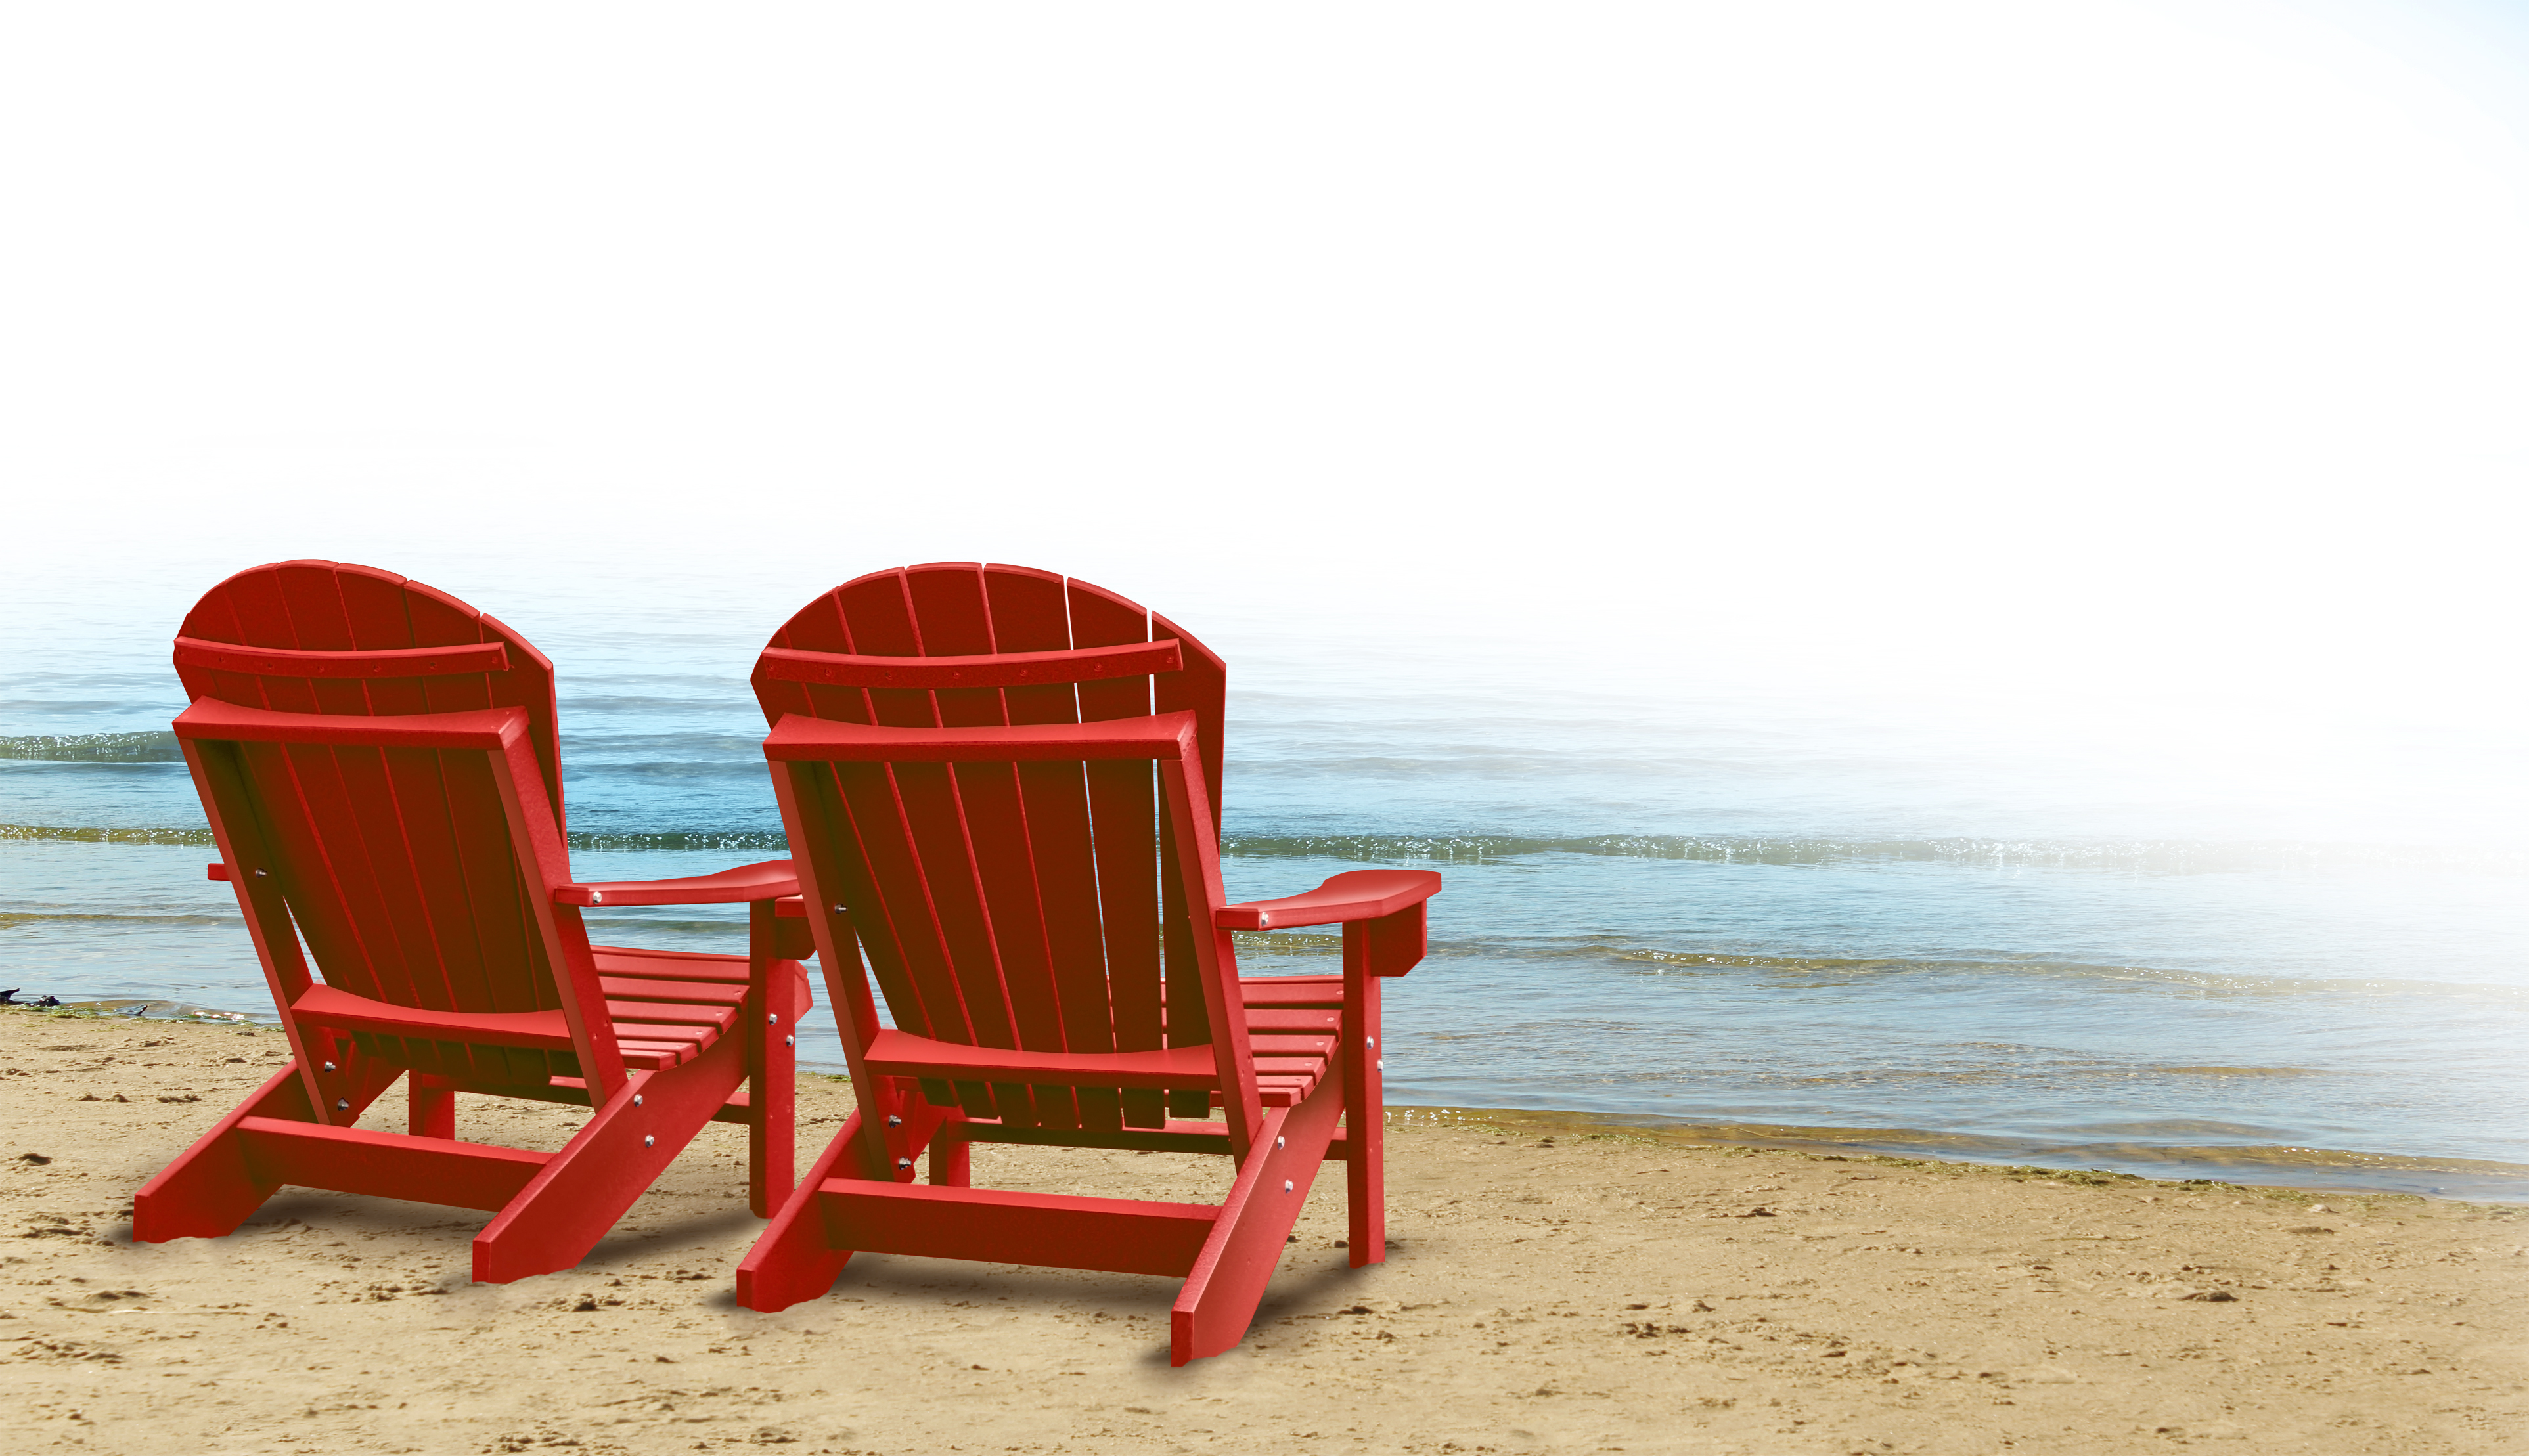 2 red chairs on beach